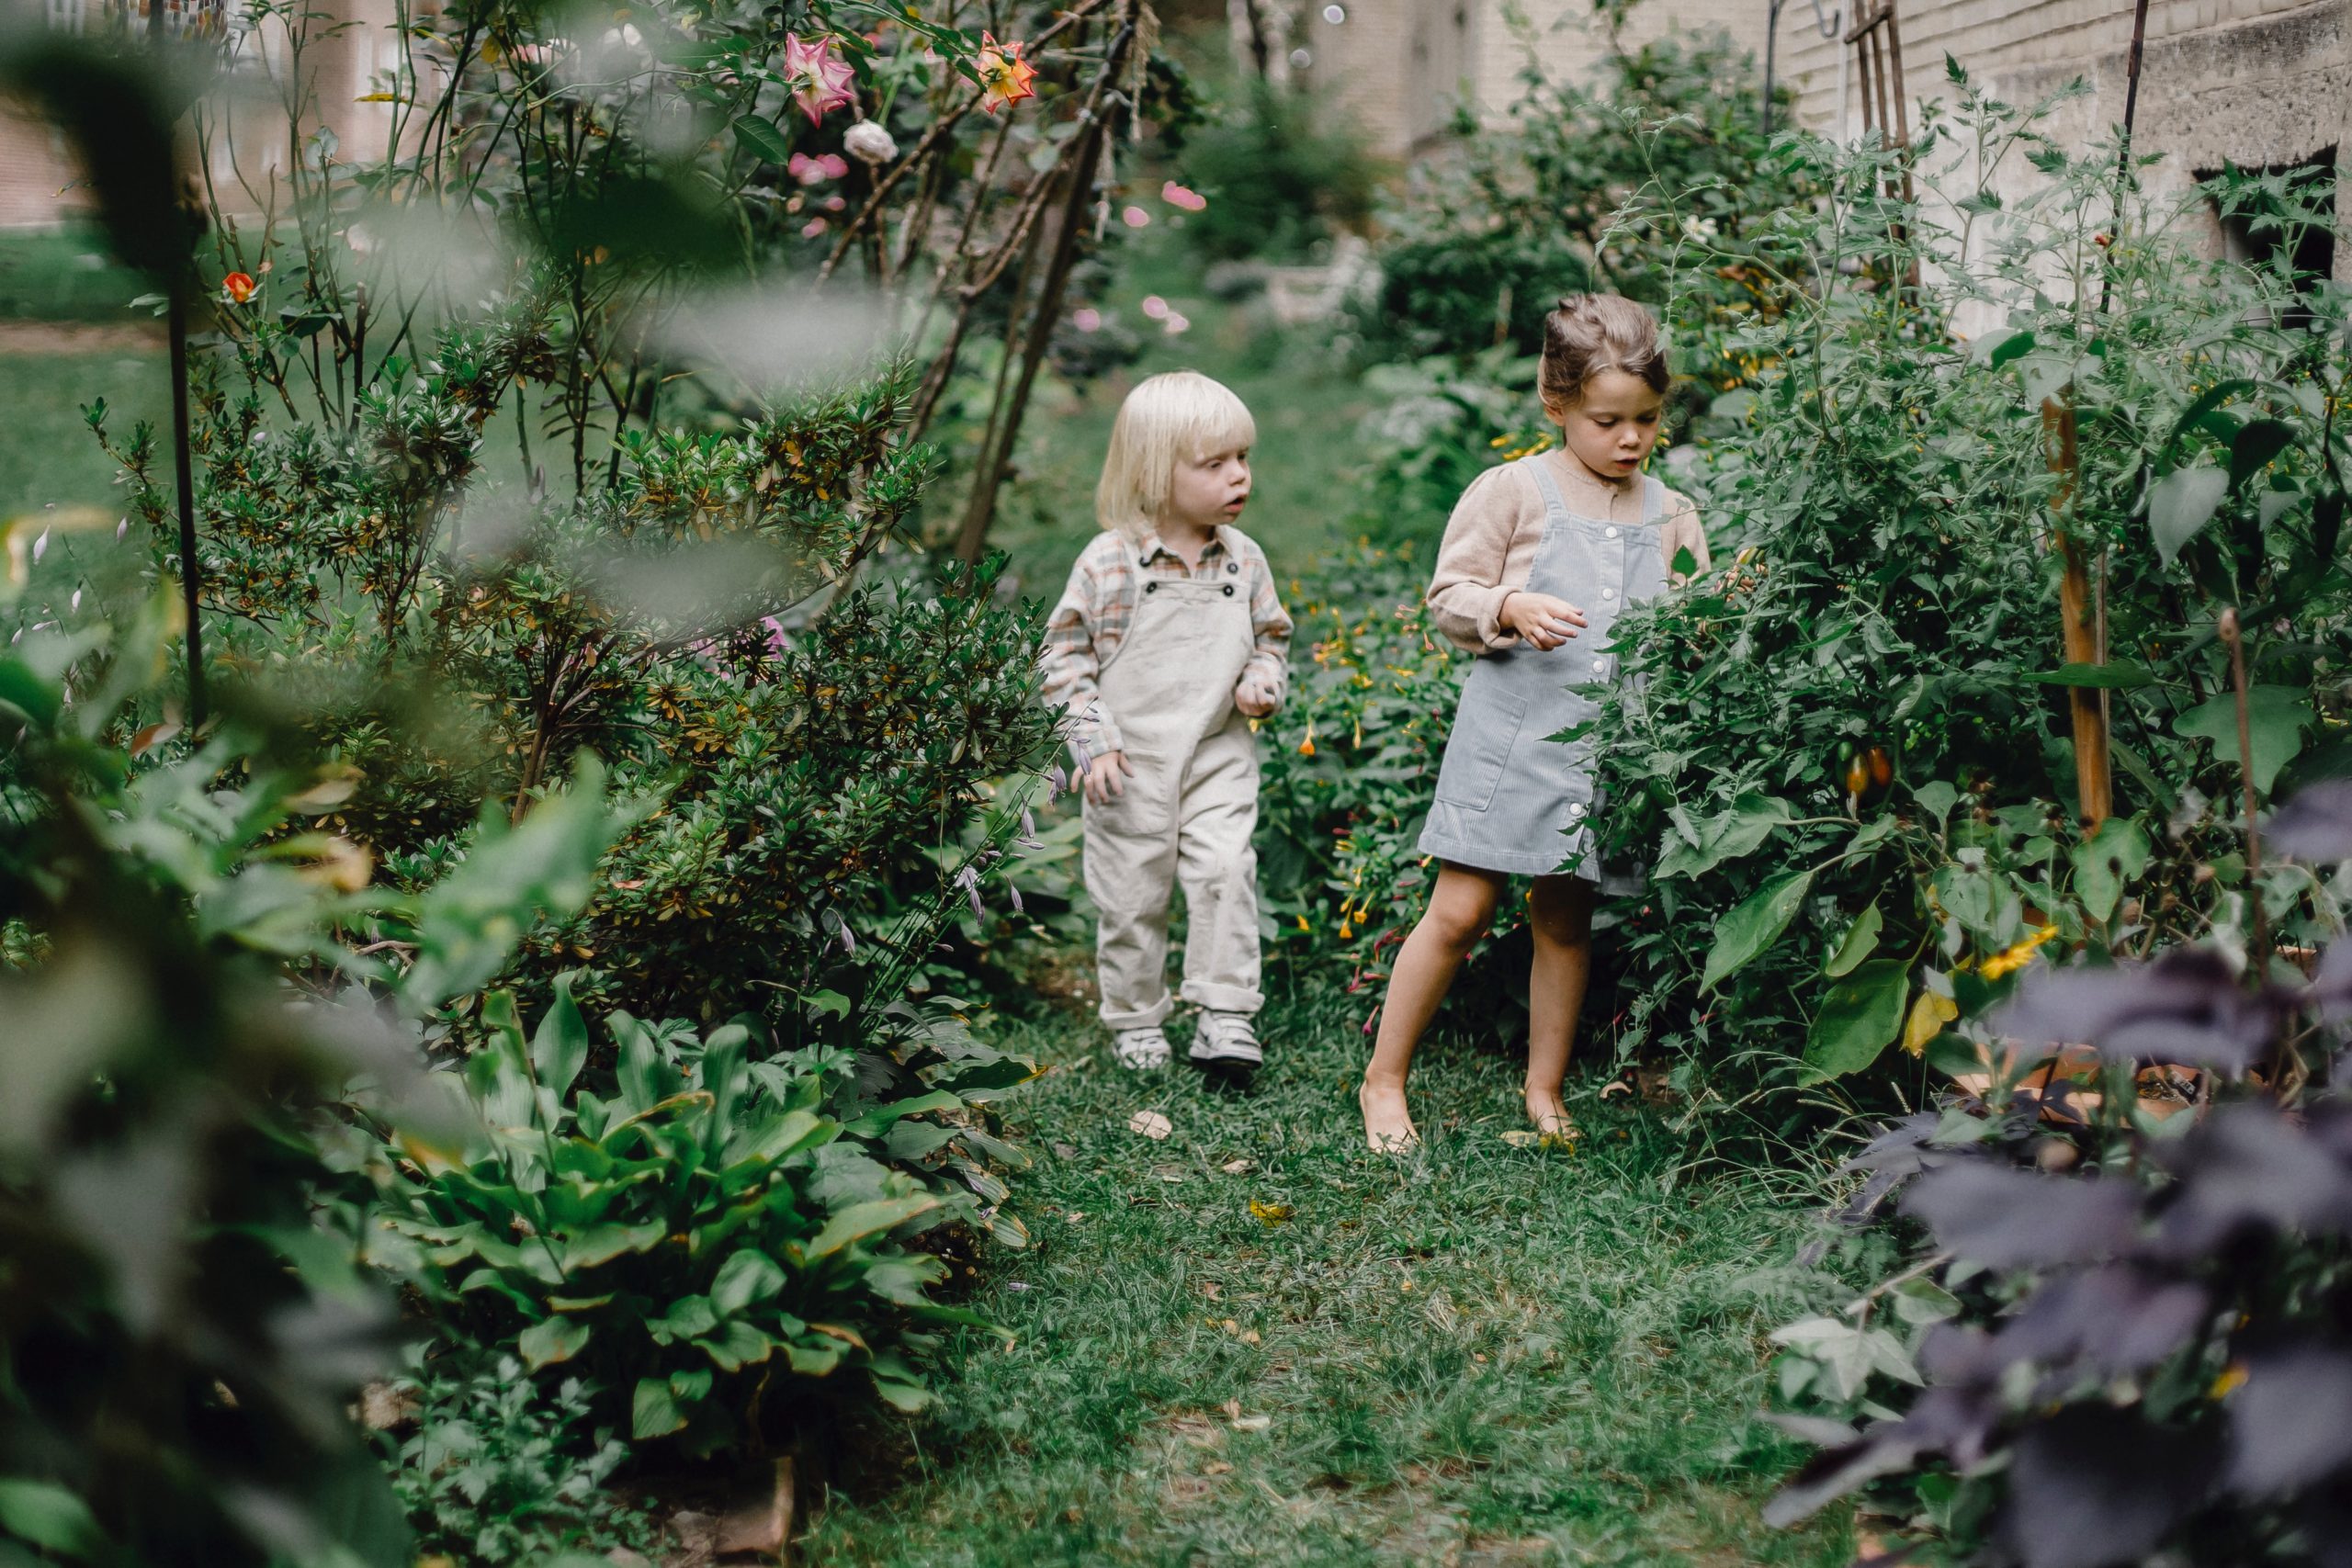 two toddlers exploring spring flowers in an article about spring activities for toddlers and babies